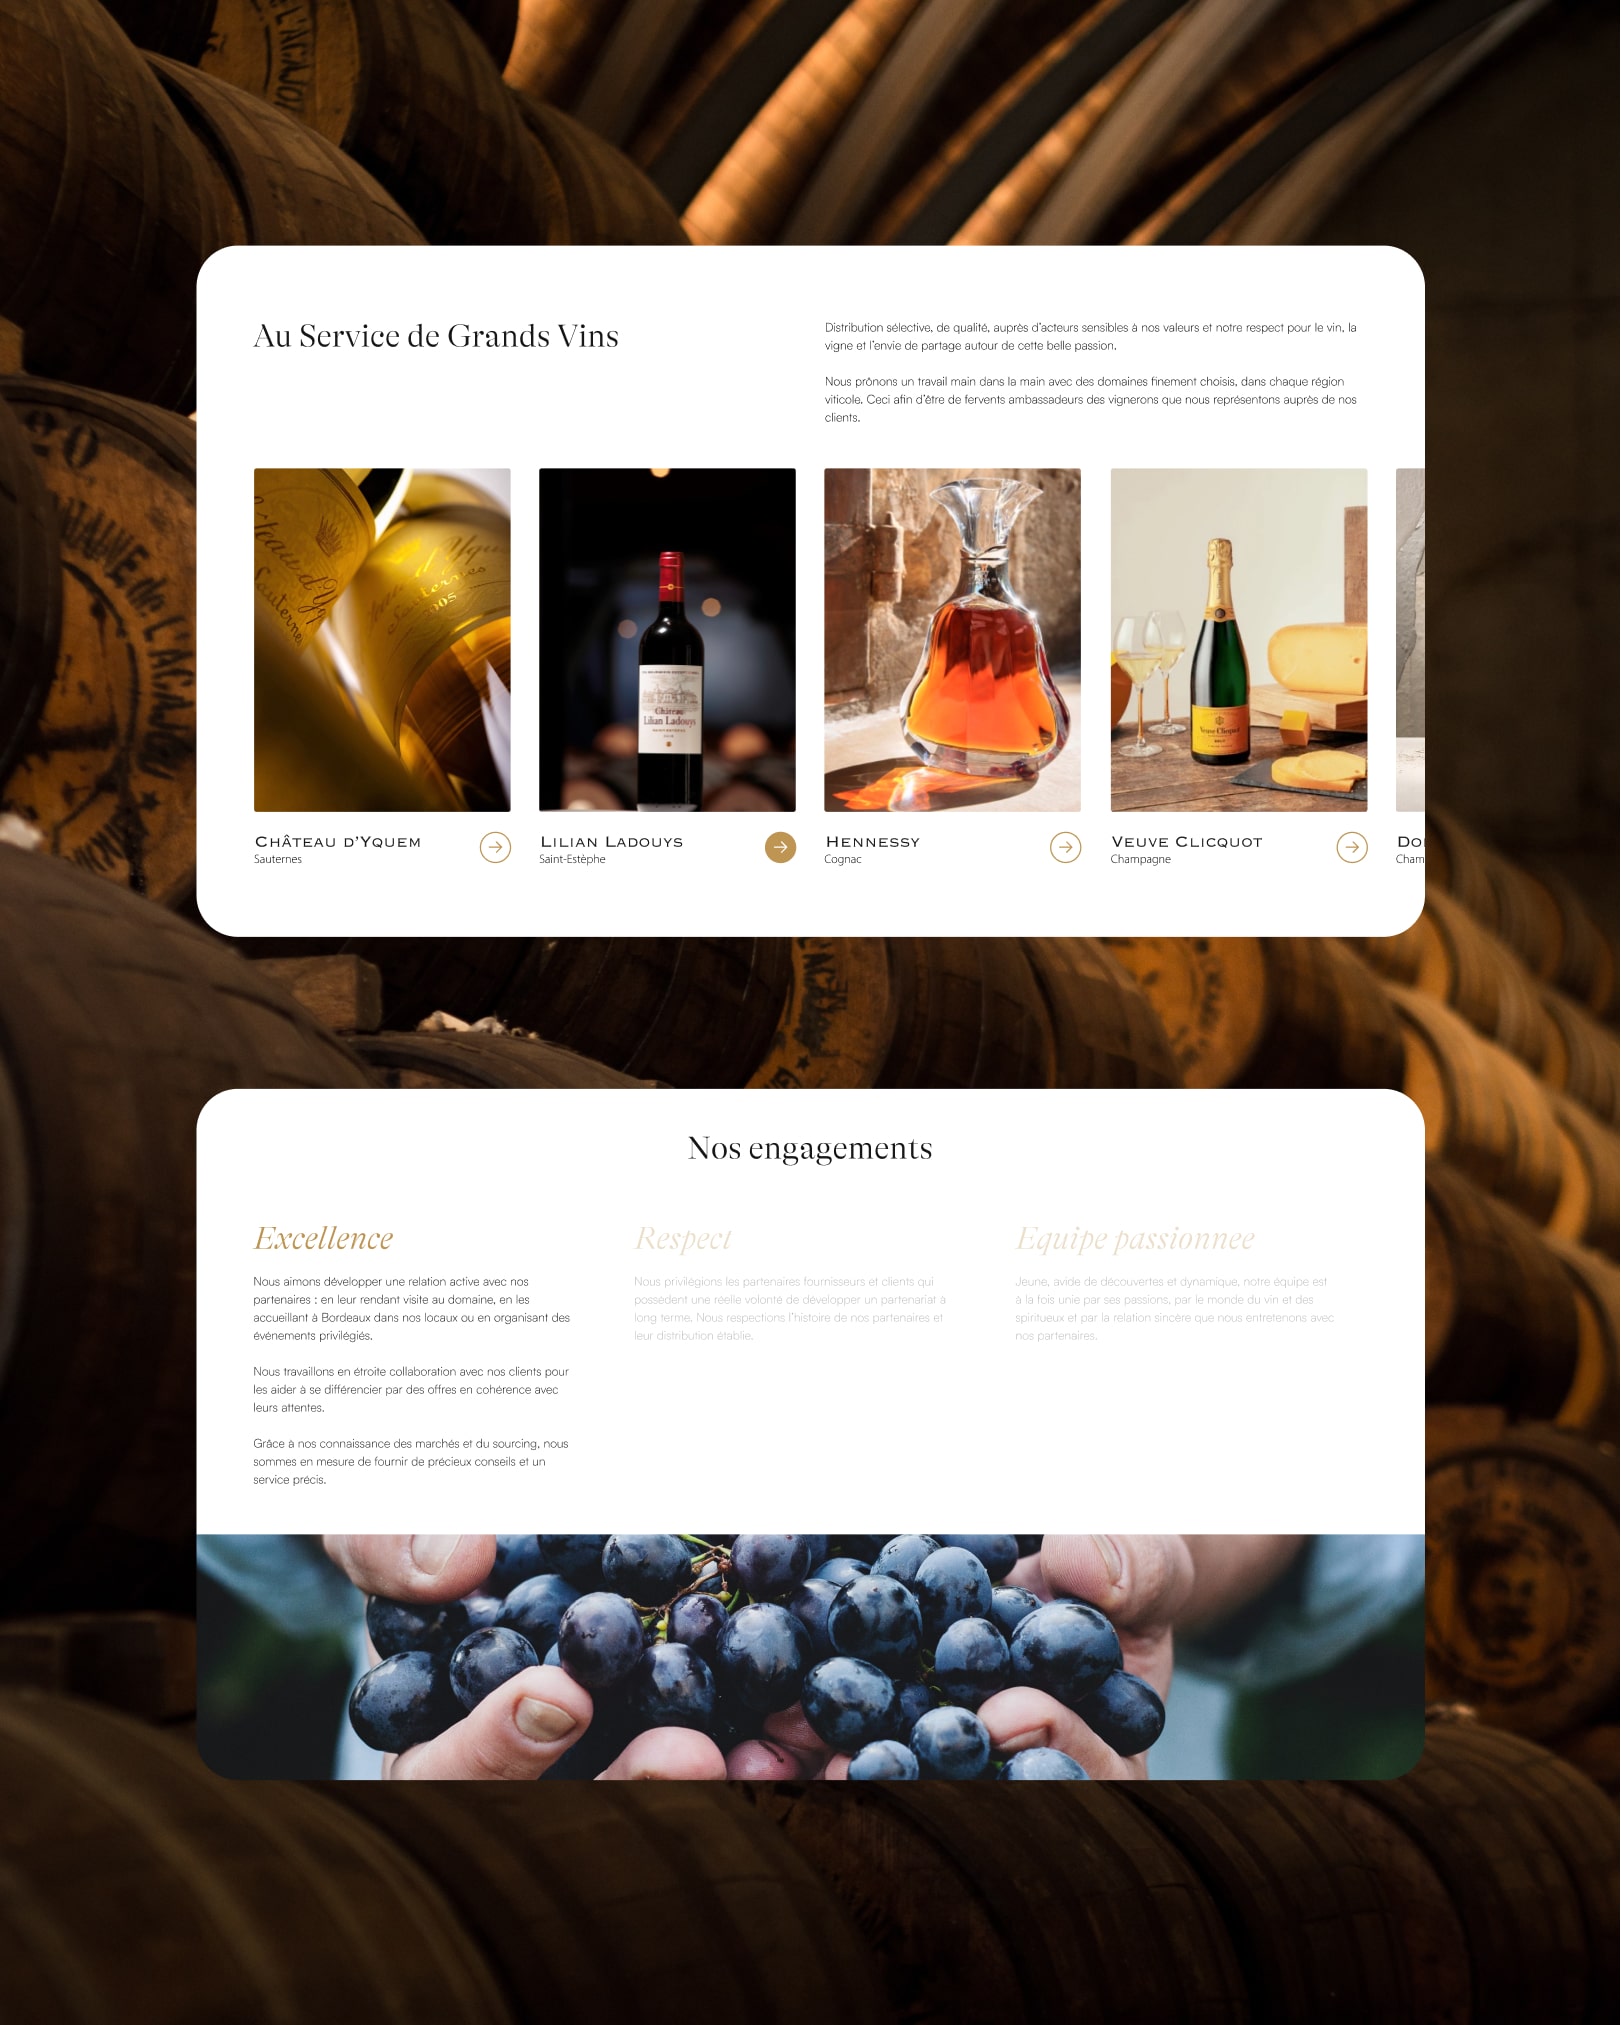 Two websites screenshots showing the 'Excellence' and 'At the service of great wines' sections